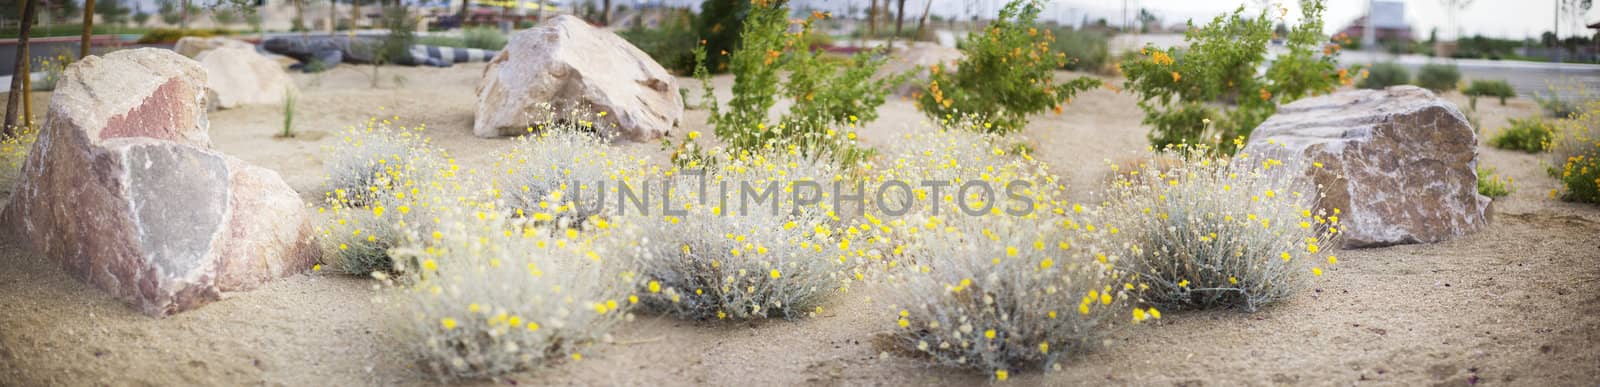 panoramic landscape of desert flowers and rocks outside in las vegas in a park 